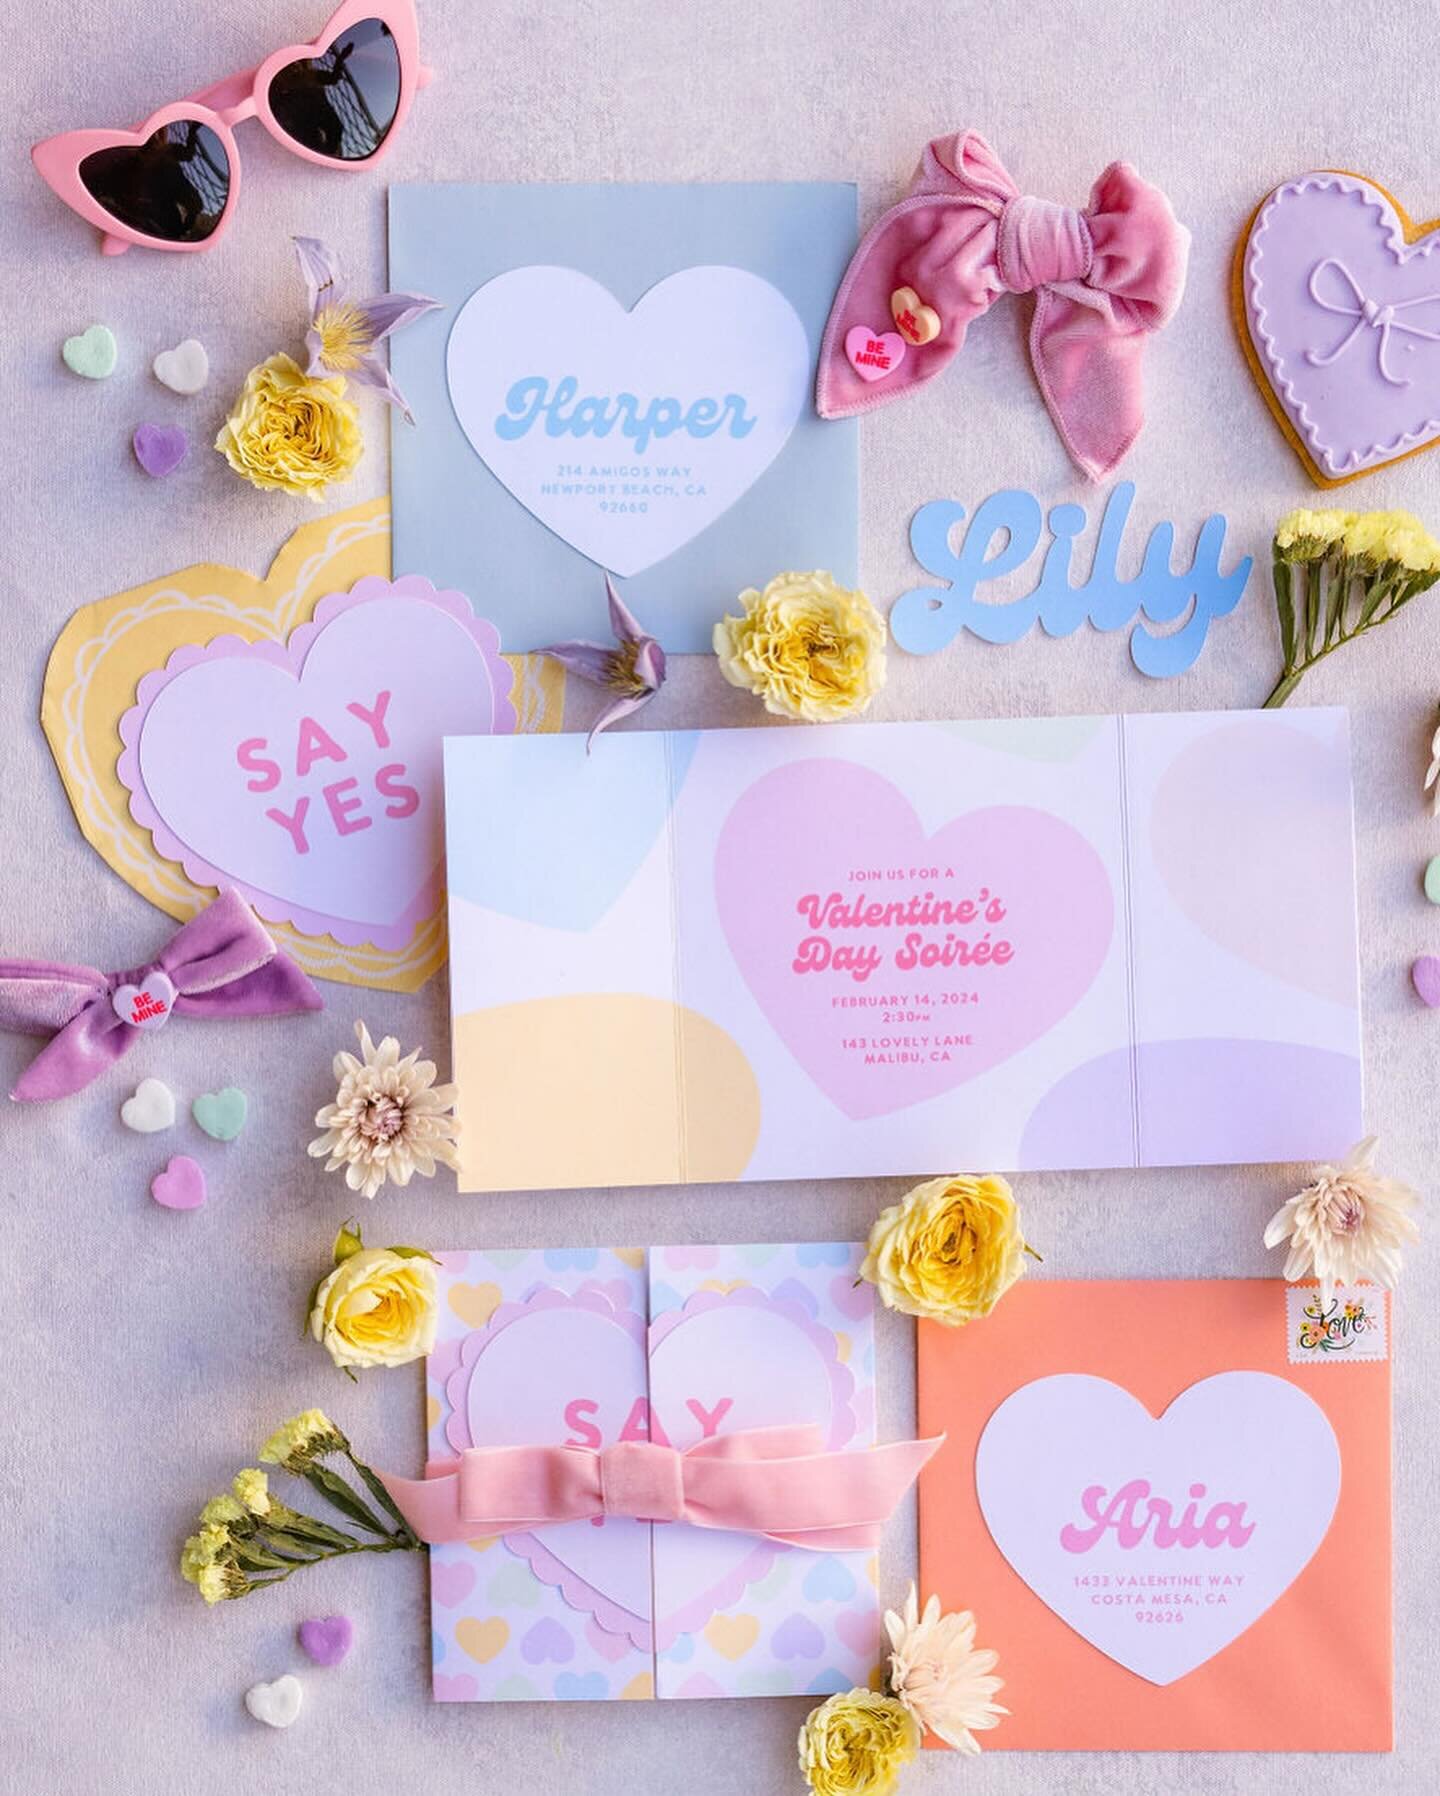 Happy Galentine&rsquo;s day to all the girlies! This hearts and bows gal pal party is just the cutest way to celebrate all those sweet little friendships, old and new! 💛💝🧡💜💗

Vendors - Design &amp; Planning - @beijosevents / Photographer - @jess